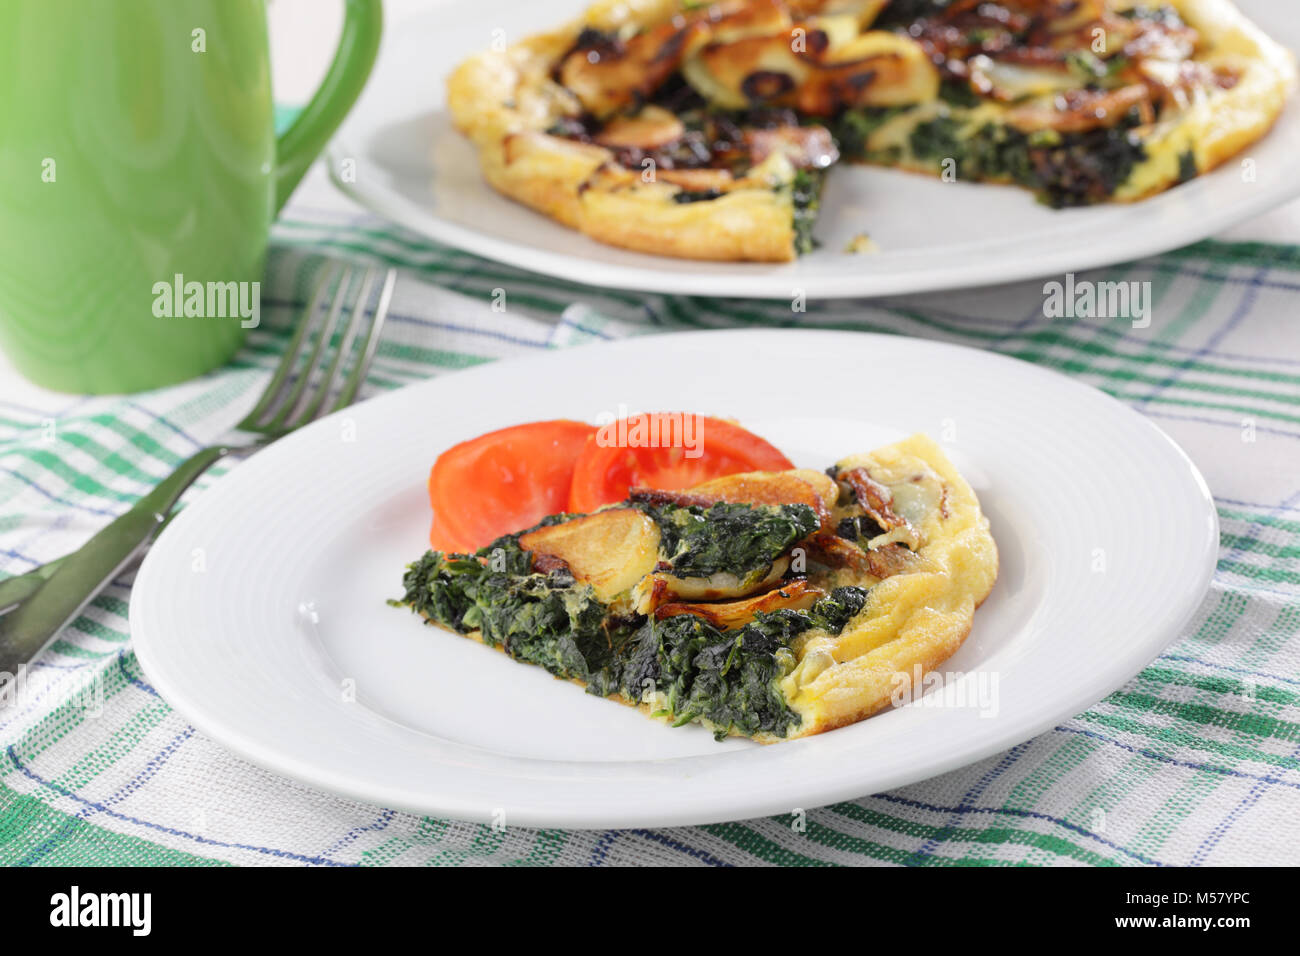 Frittata with spinach, potato, and tomato on white plate Stock Photo